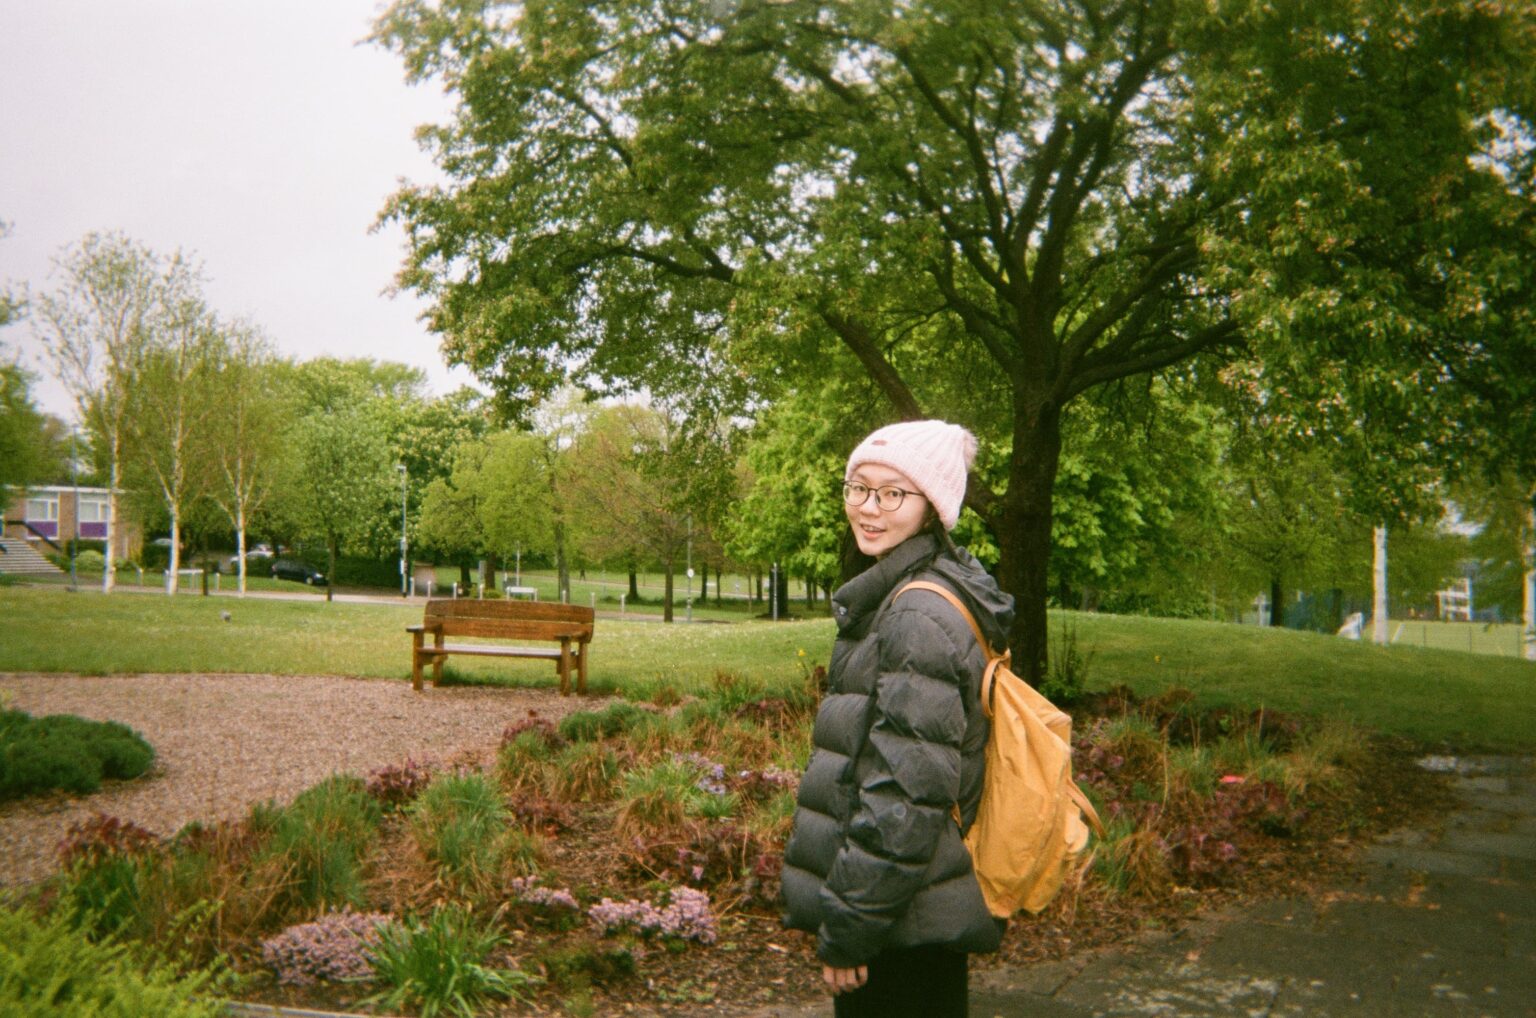 A female student standing in front of a tree in a park